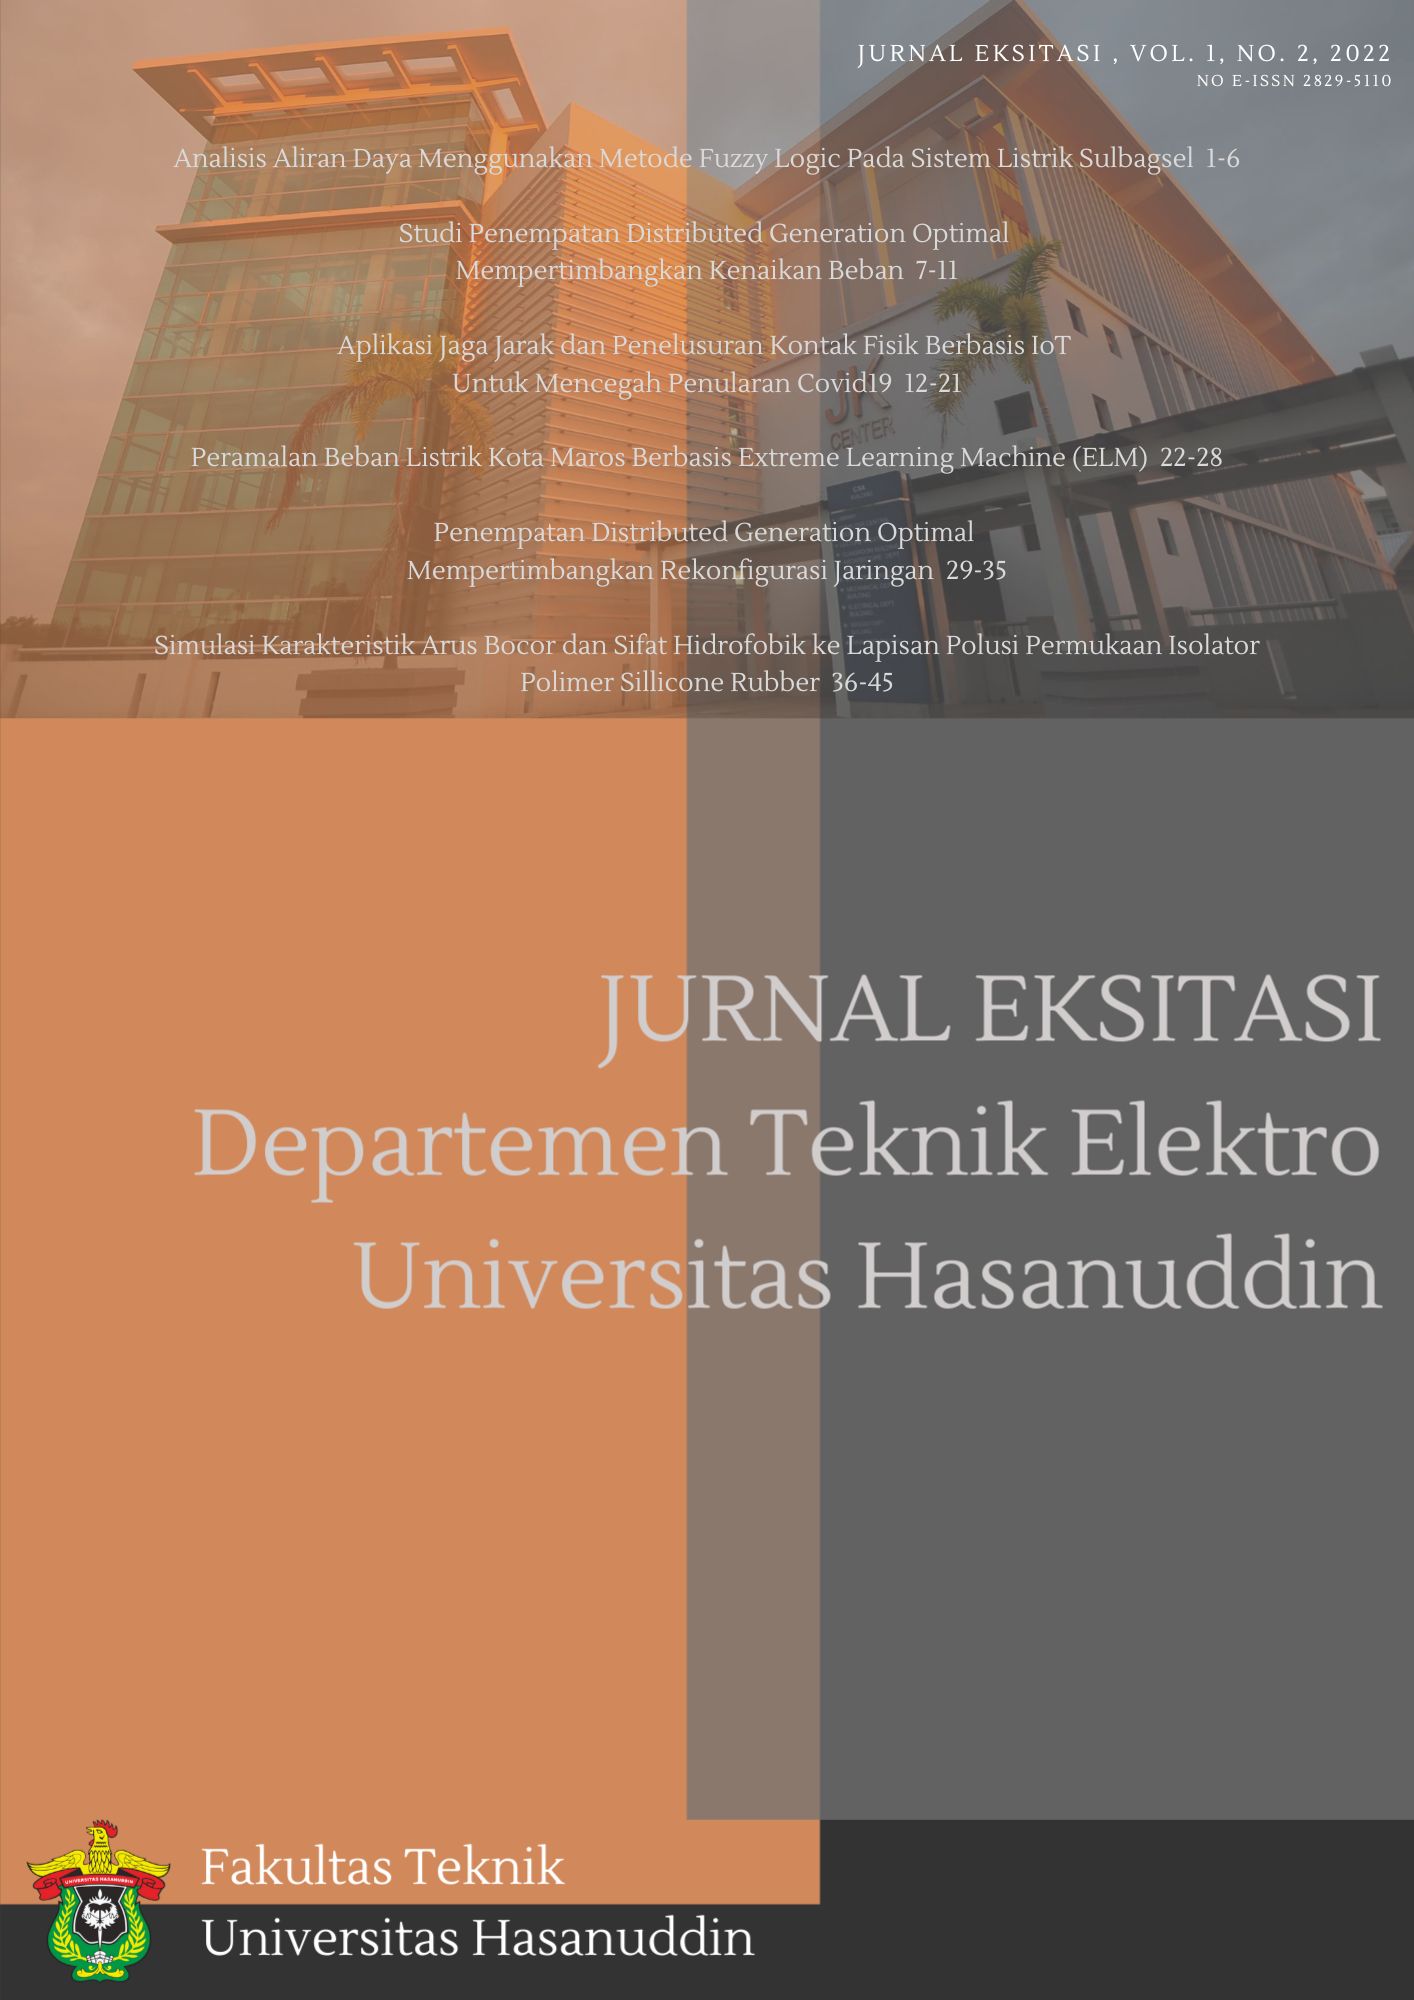 					View Vol. 1 No. 2 (2022): Journal of Excitation of the Department of Electrical Engineering. Vol. 1. No. 2. 2022
				